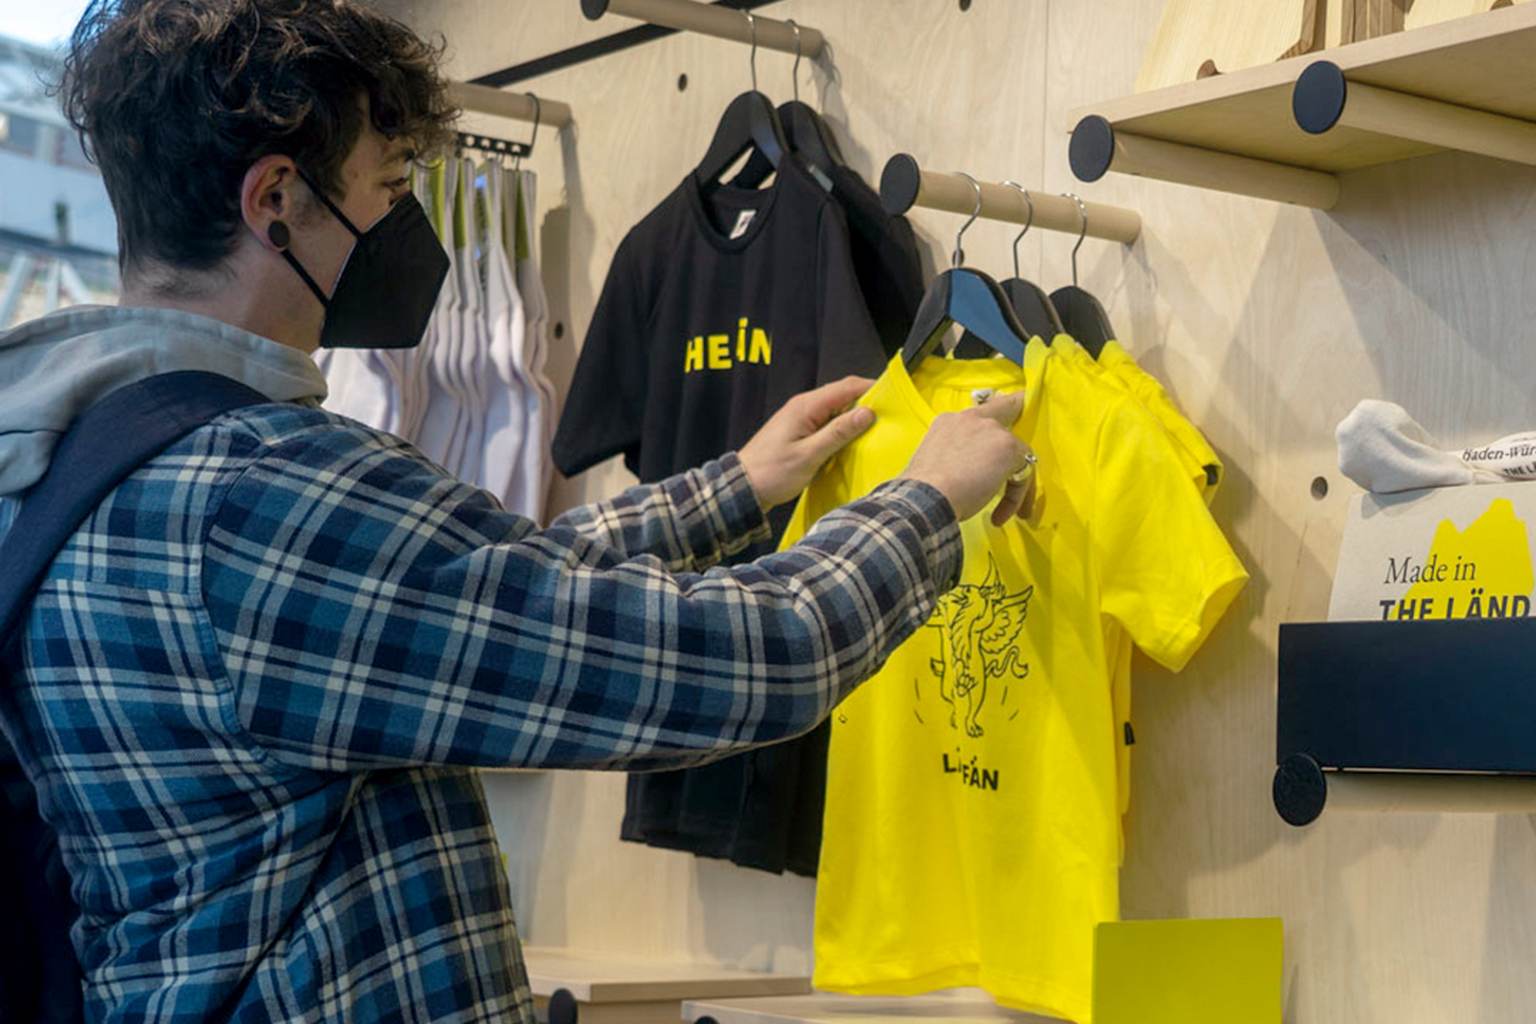 A man looks at THE LÄND merchandise in a shop.